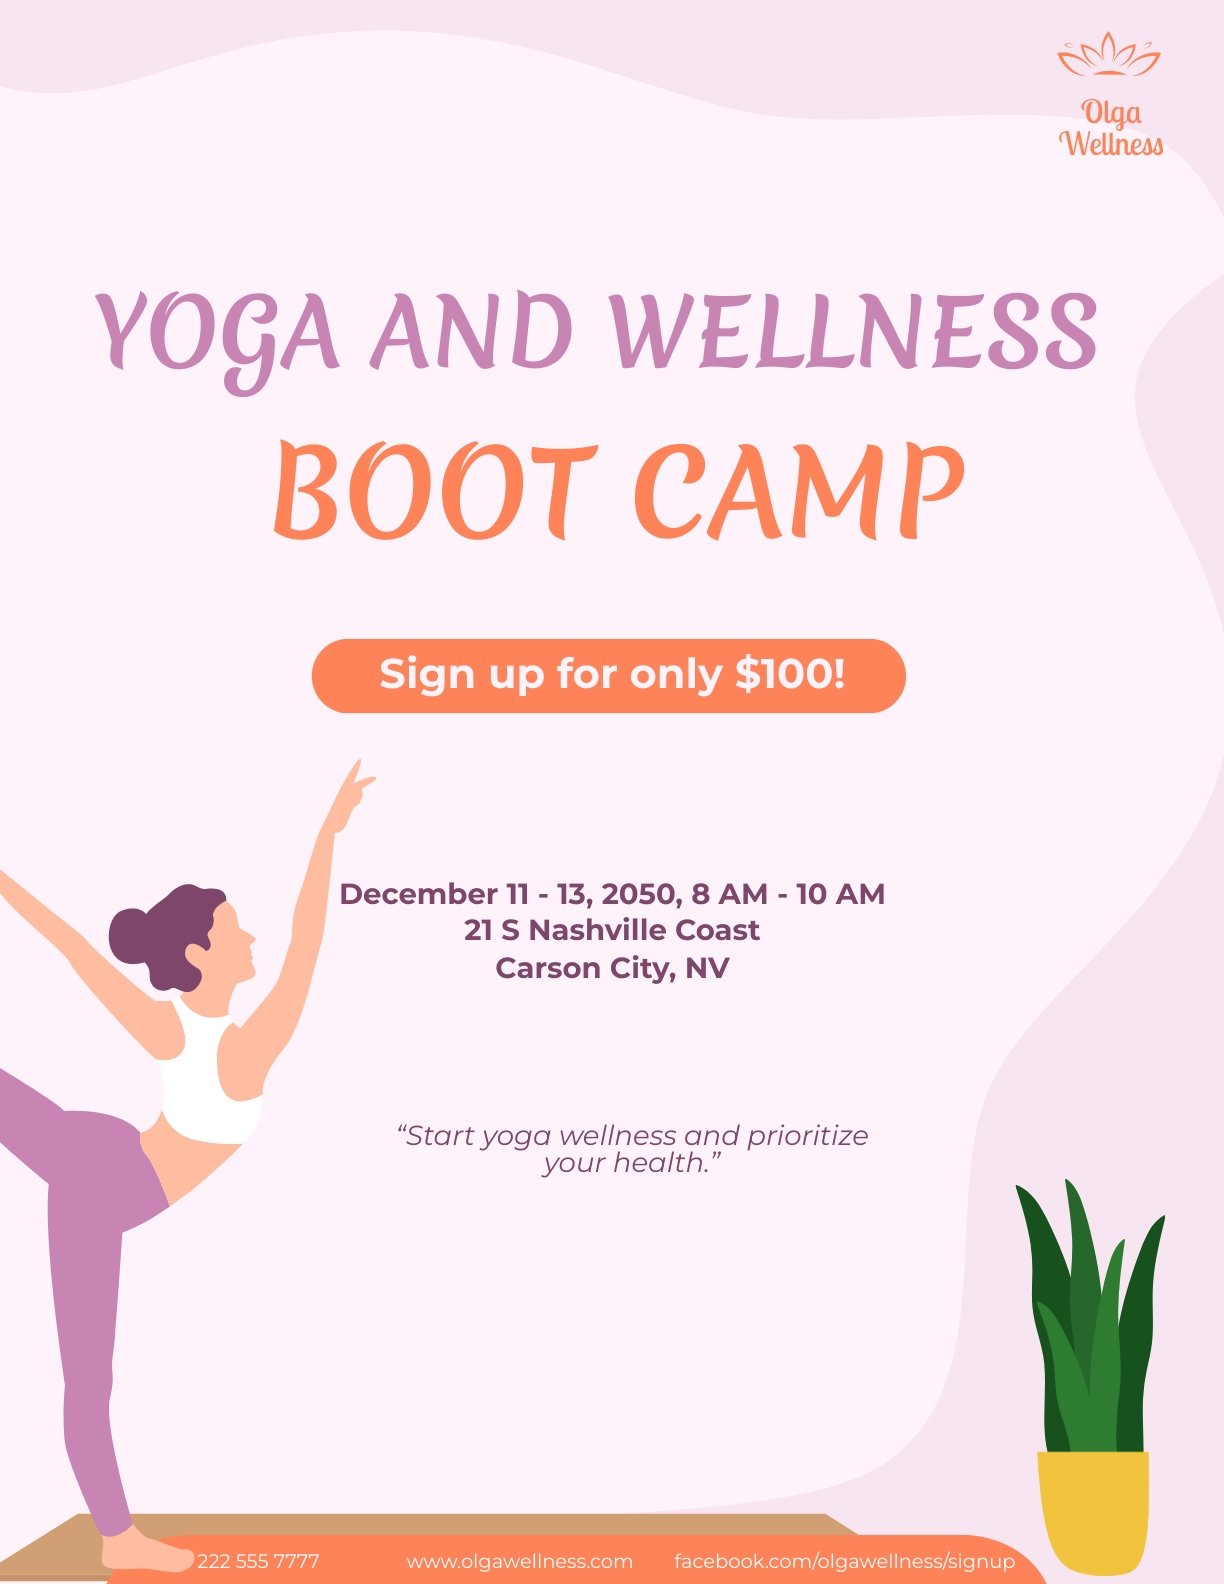 Wellness Boot Camp Flyer in Word, Google Docs, Illustrator, PSD, Apple Pages, Publisher